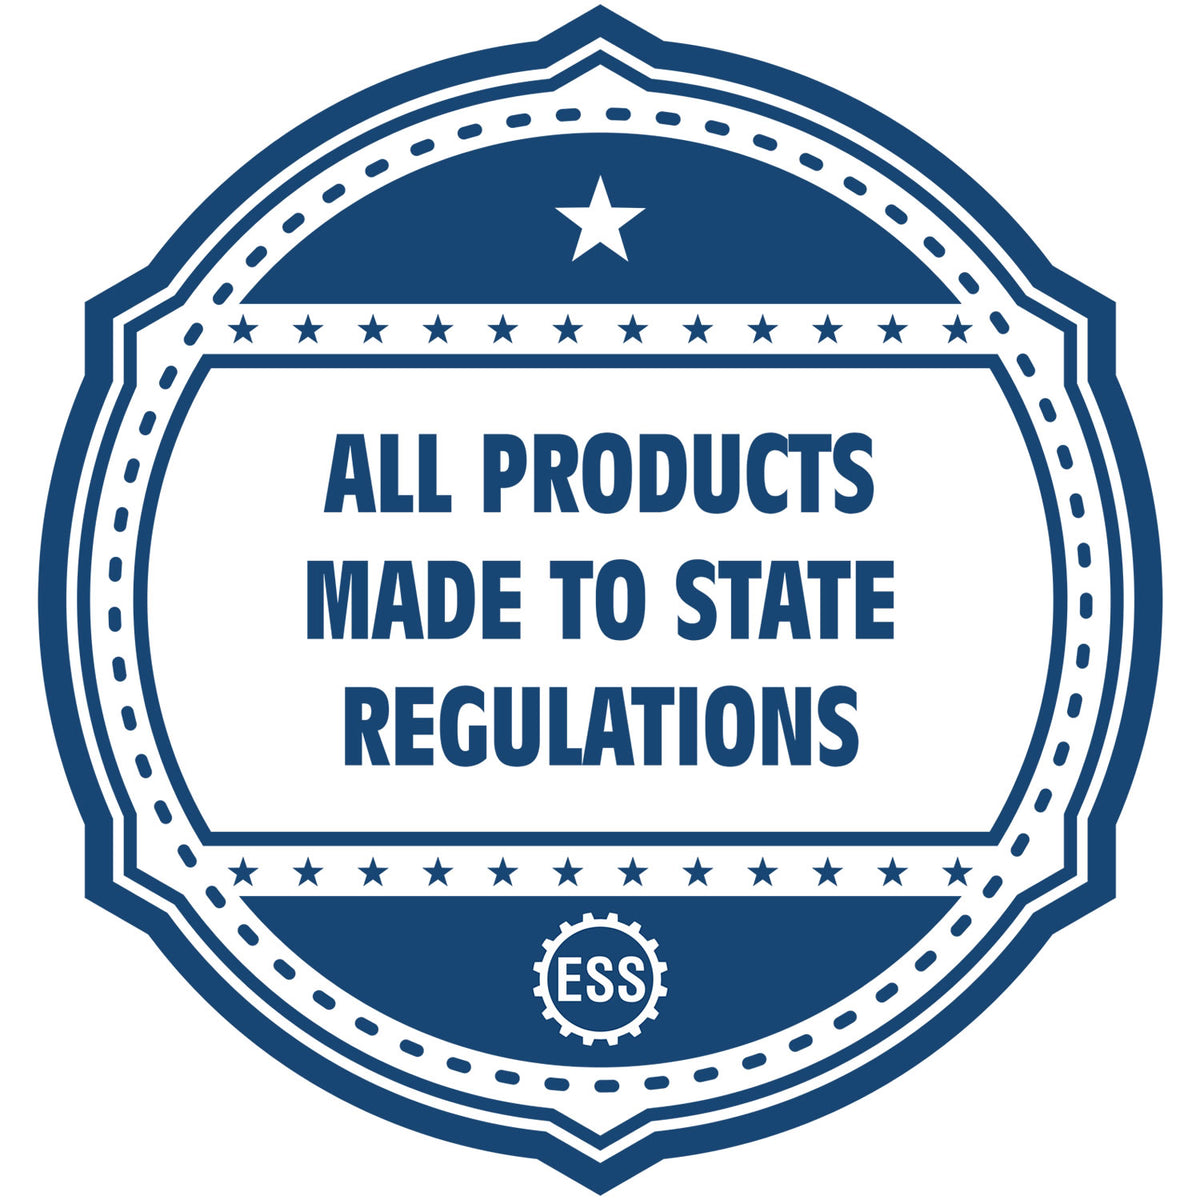 An icon or badge element for the Louisiana Desk Surveyor Seal Embosser showing that this product is made in compliance with state regulations.